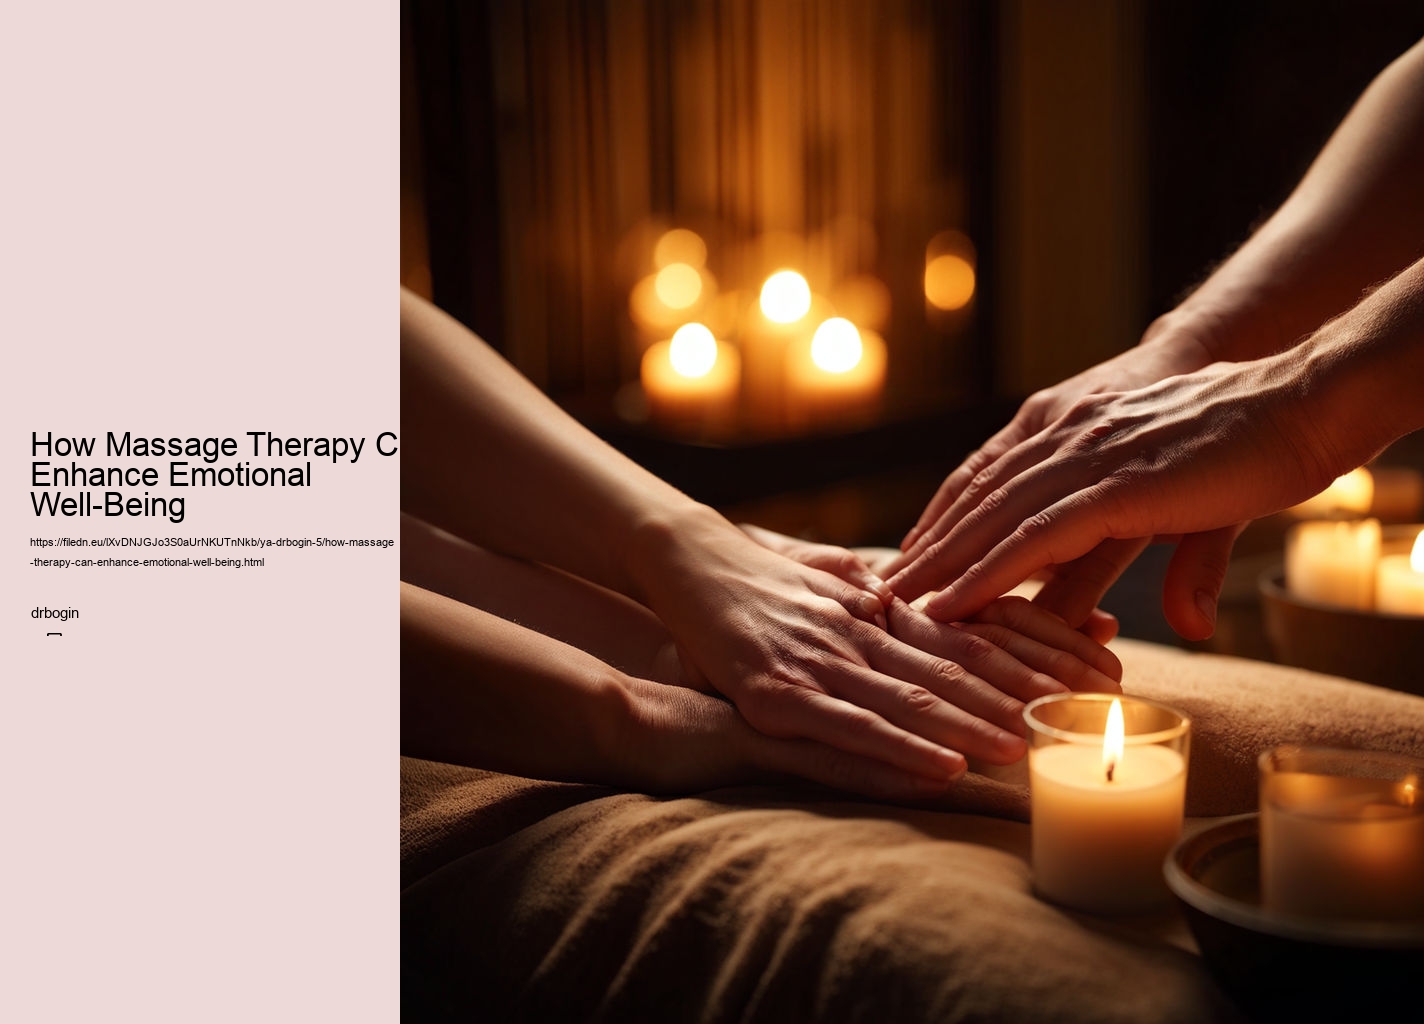 How Massage Therapy Can Enhance Emotional Well-Being